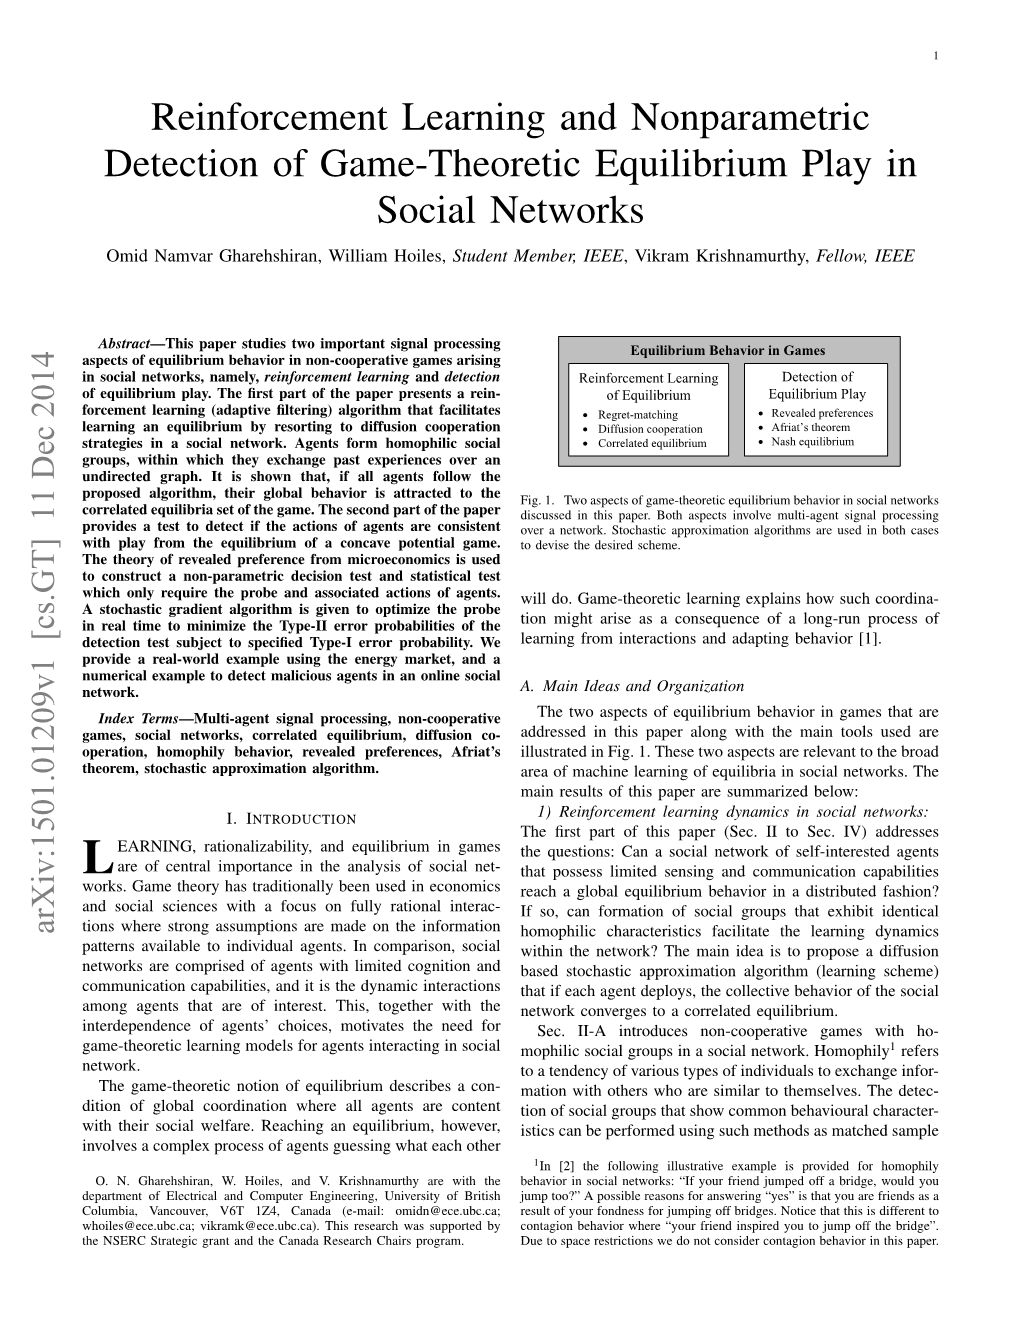 Reinforcement Learning and Nonparametric Detection of Game